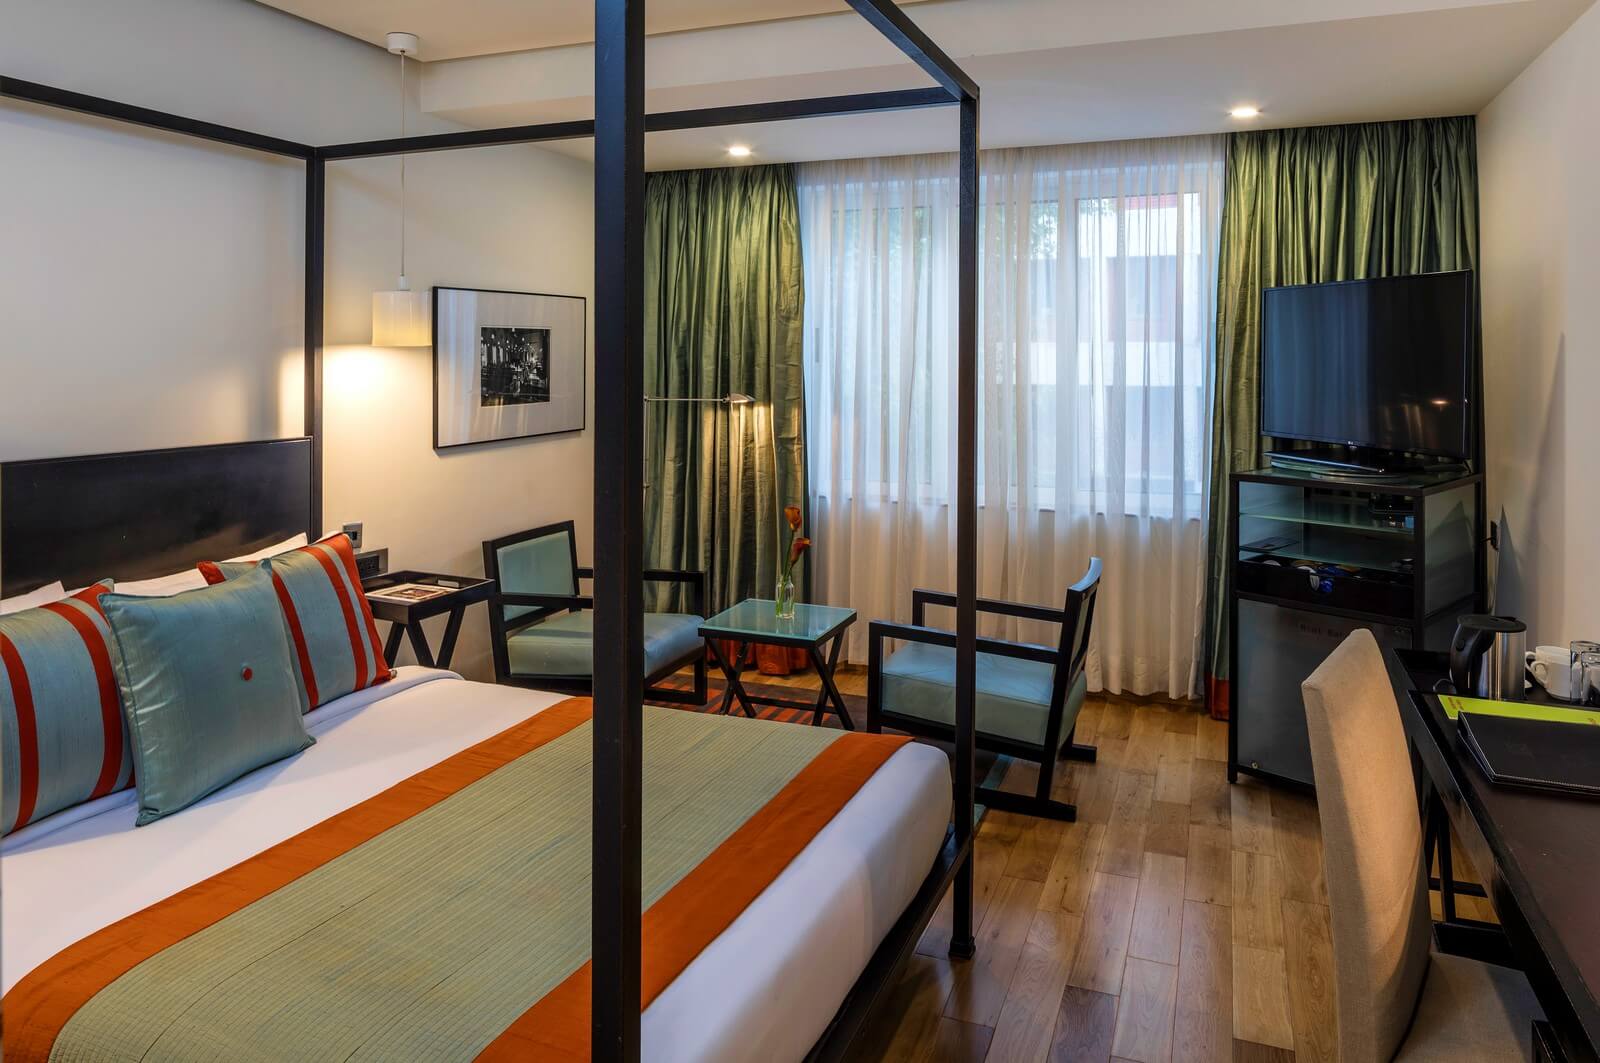 Deluxe Rooms at The Park Hotels Bangalore